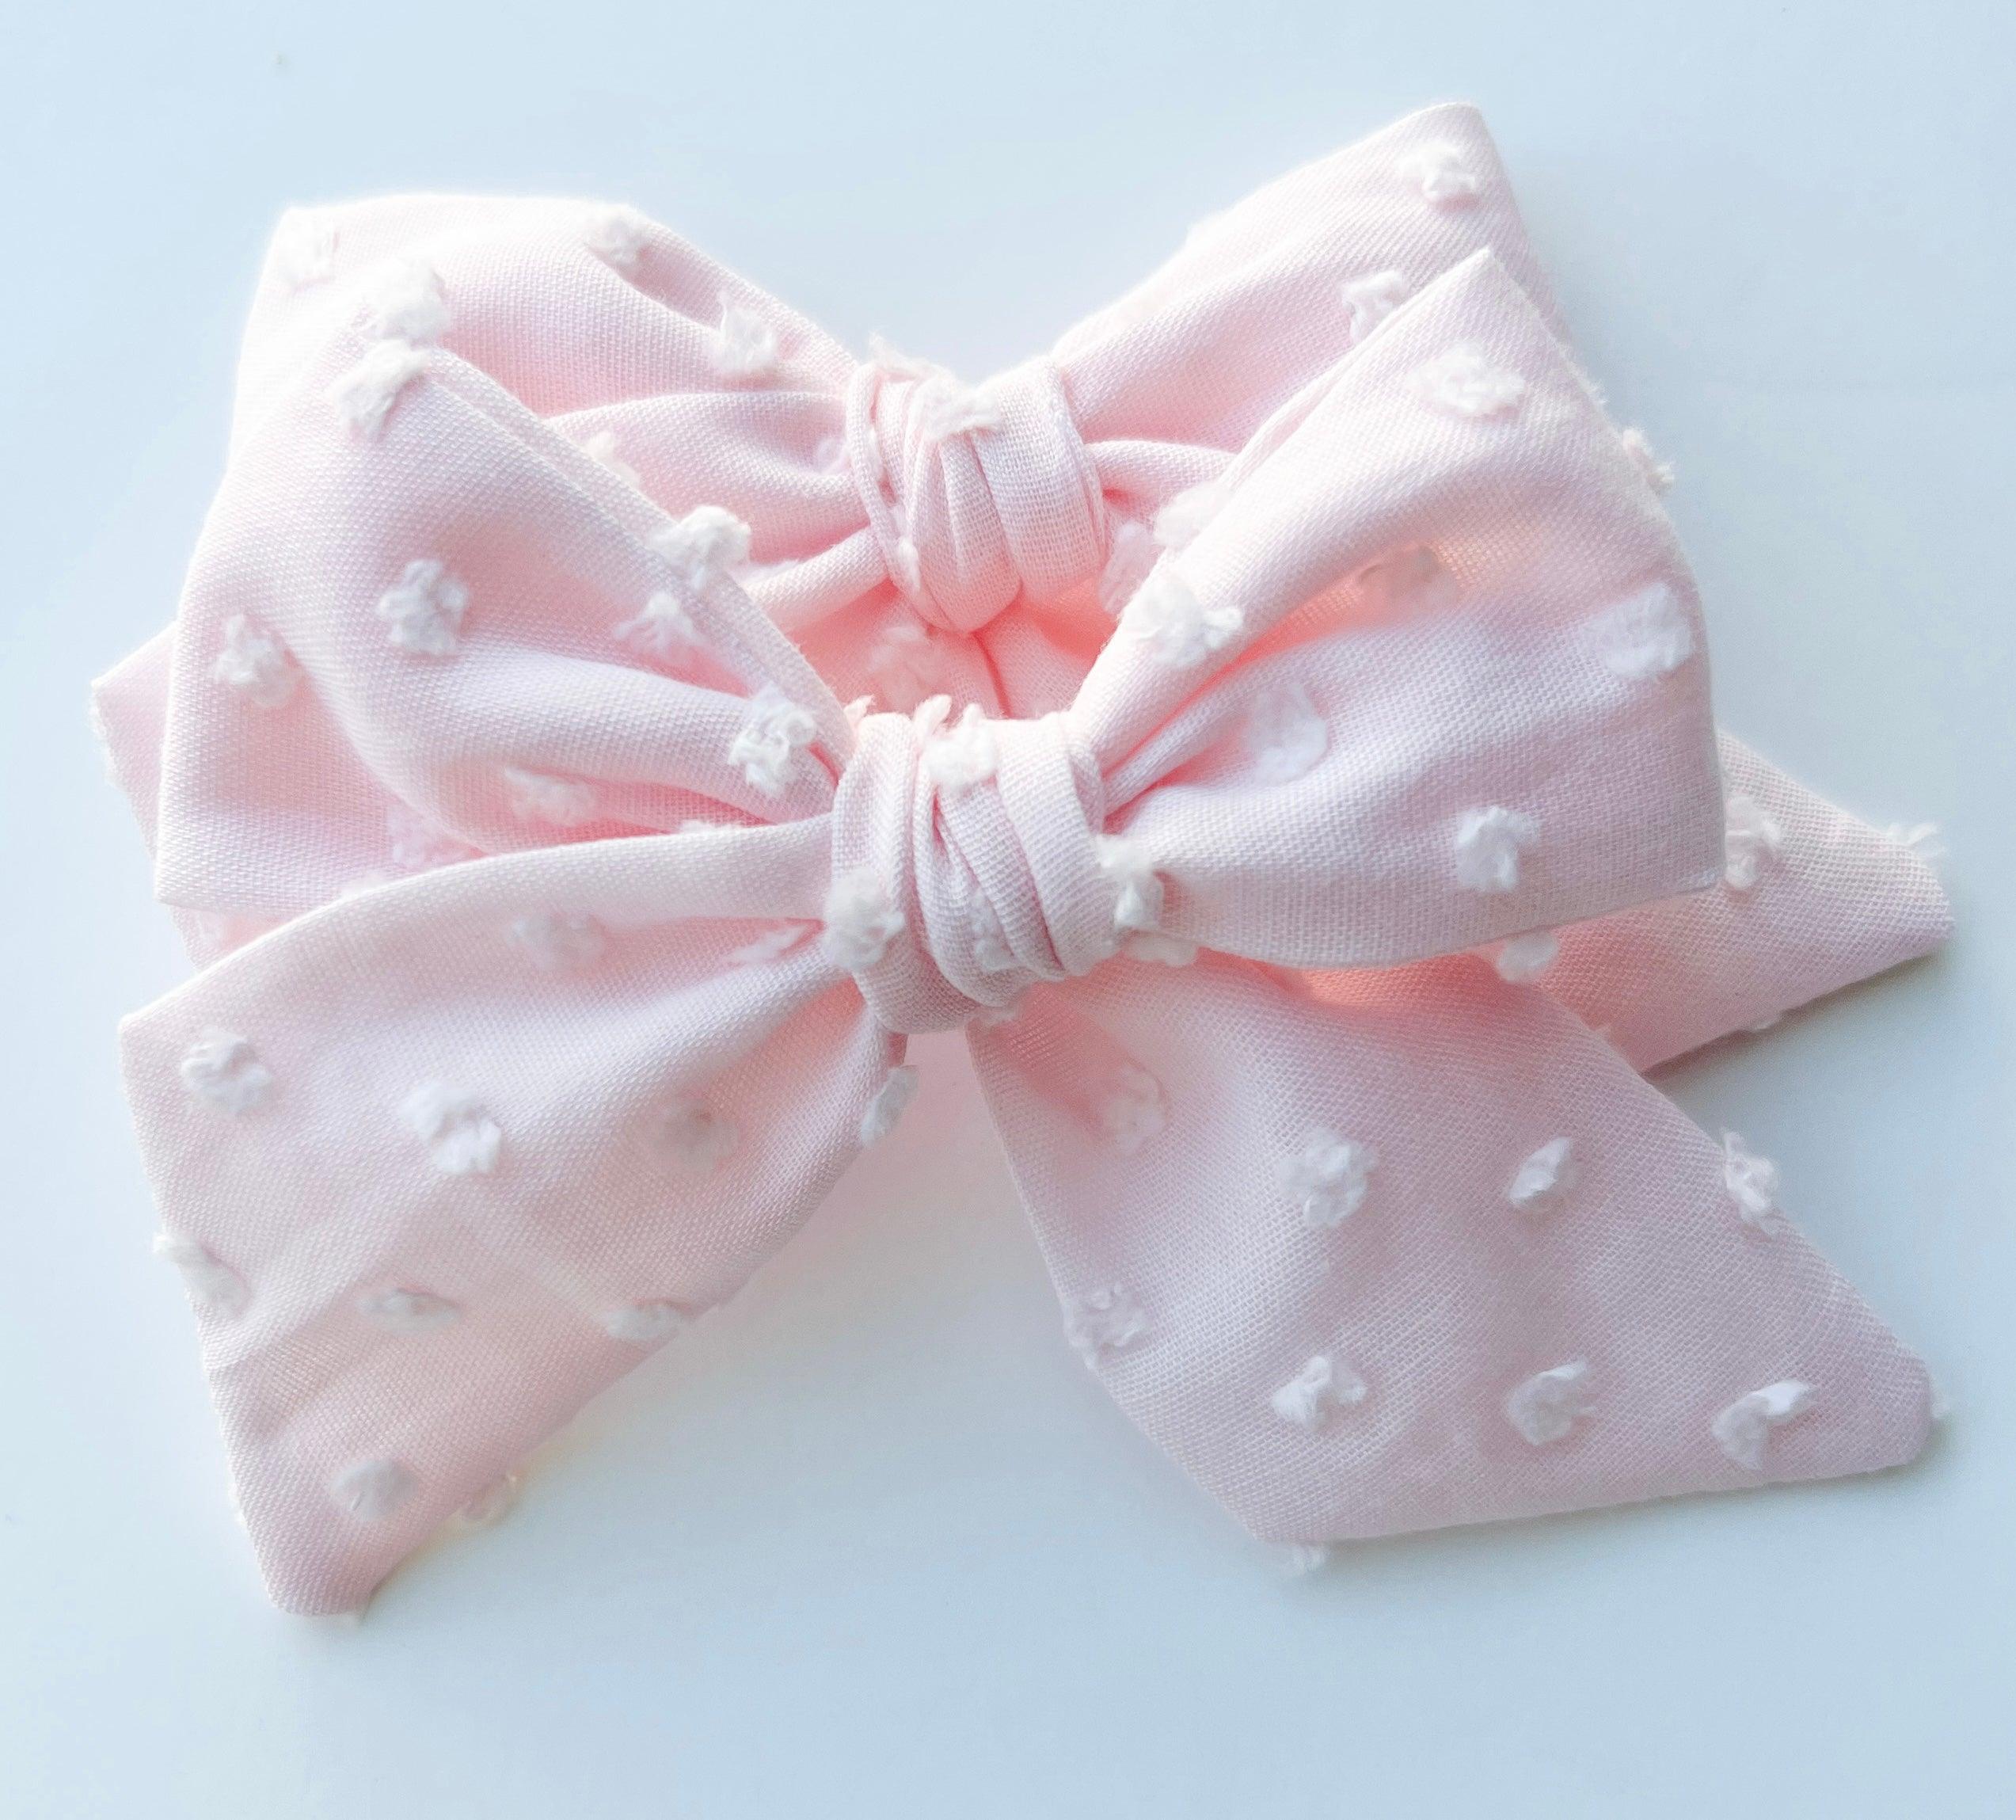 Pinwheel Bow - Pink Swiss Dot | Nashville Bow Co. - Classic Hair Bows, Bow Ties, Basket Bows, Pacifier Clips, Wreath Sashes, Swaddle Bows. Classic Southern Charm.